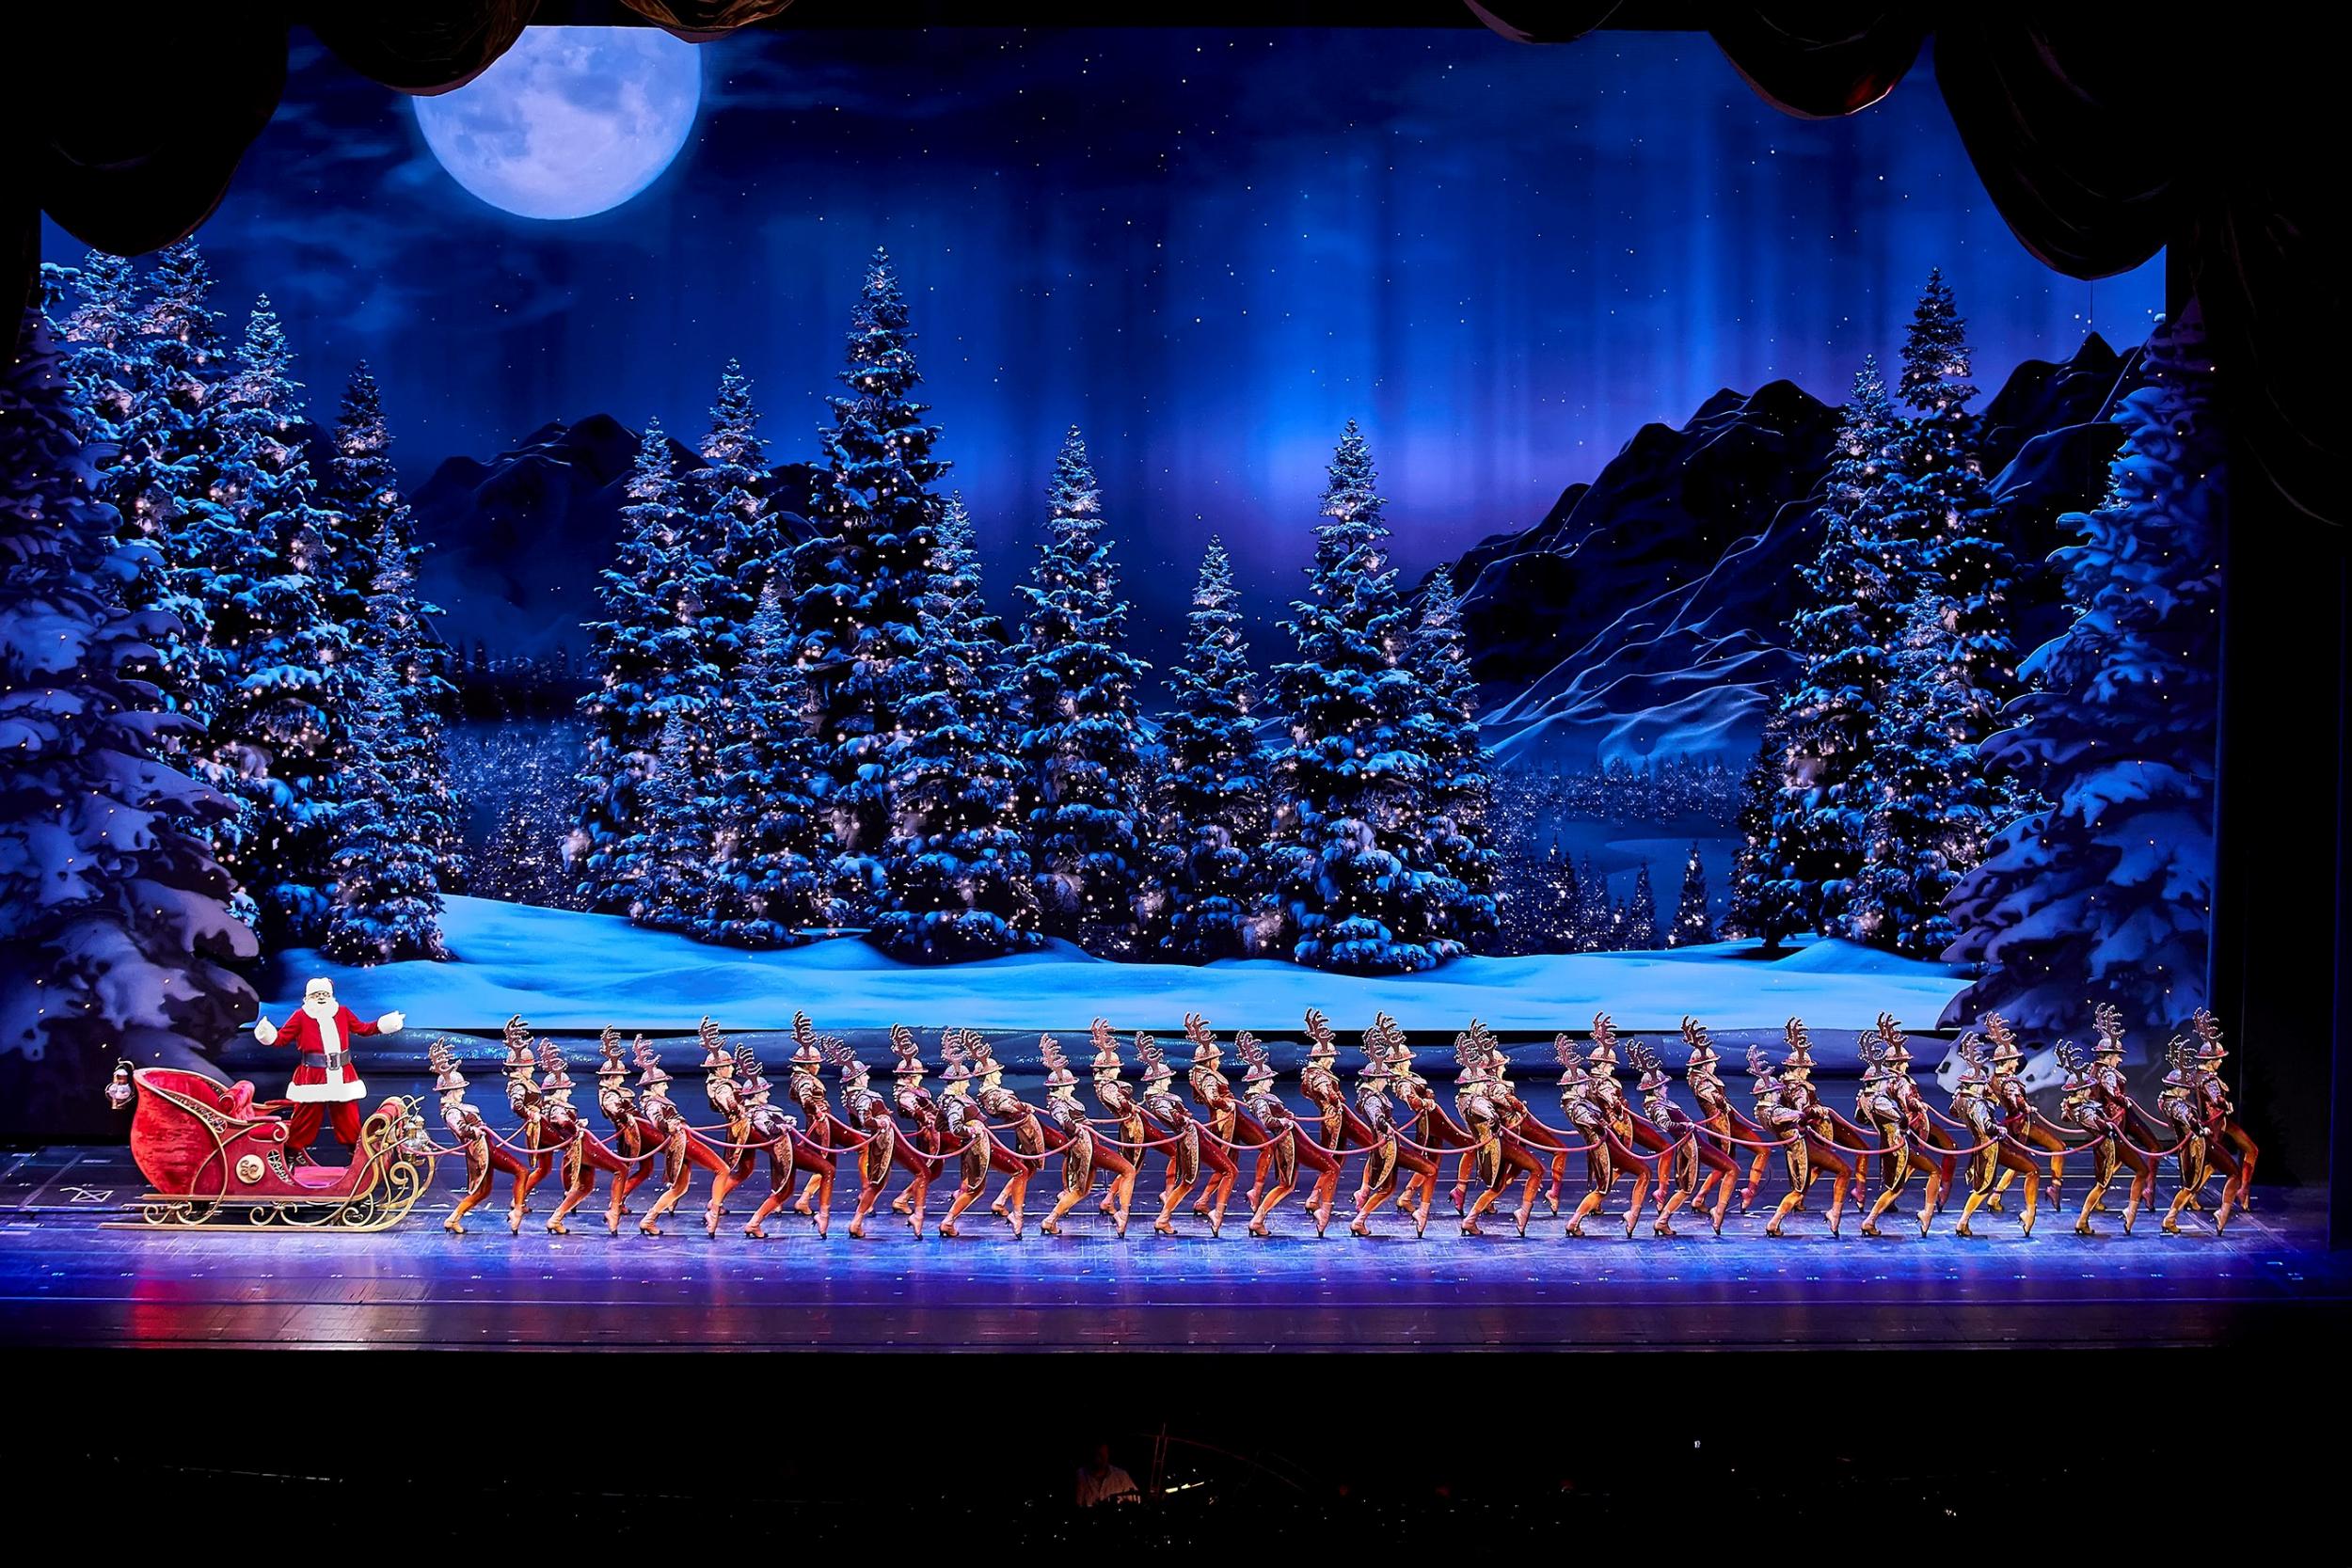 The Rockettes are a vivid part of NYC Christmas lore